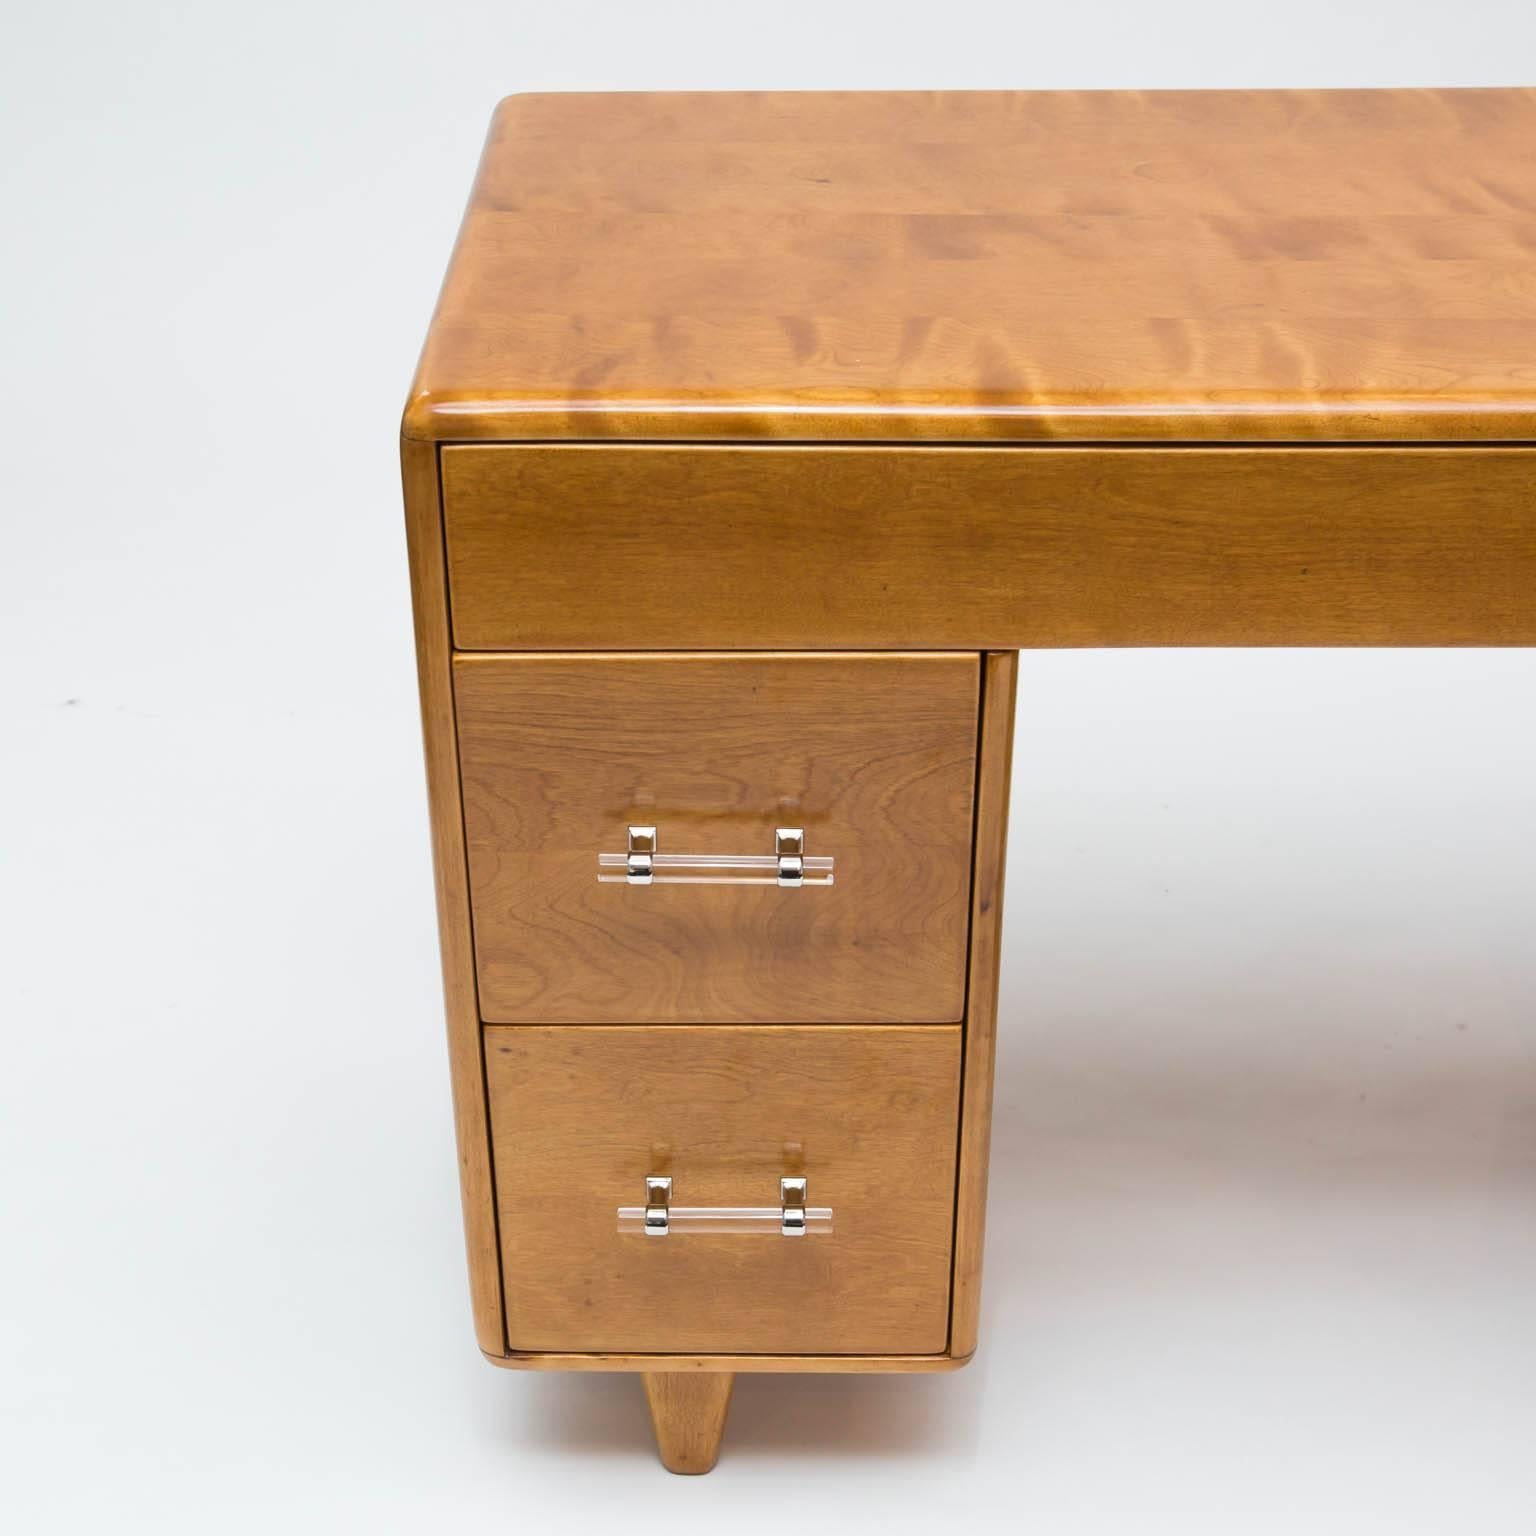 Vintage maple desk just refinished in a clear lacquer with Lucite and nickel handles.